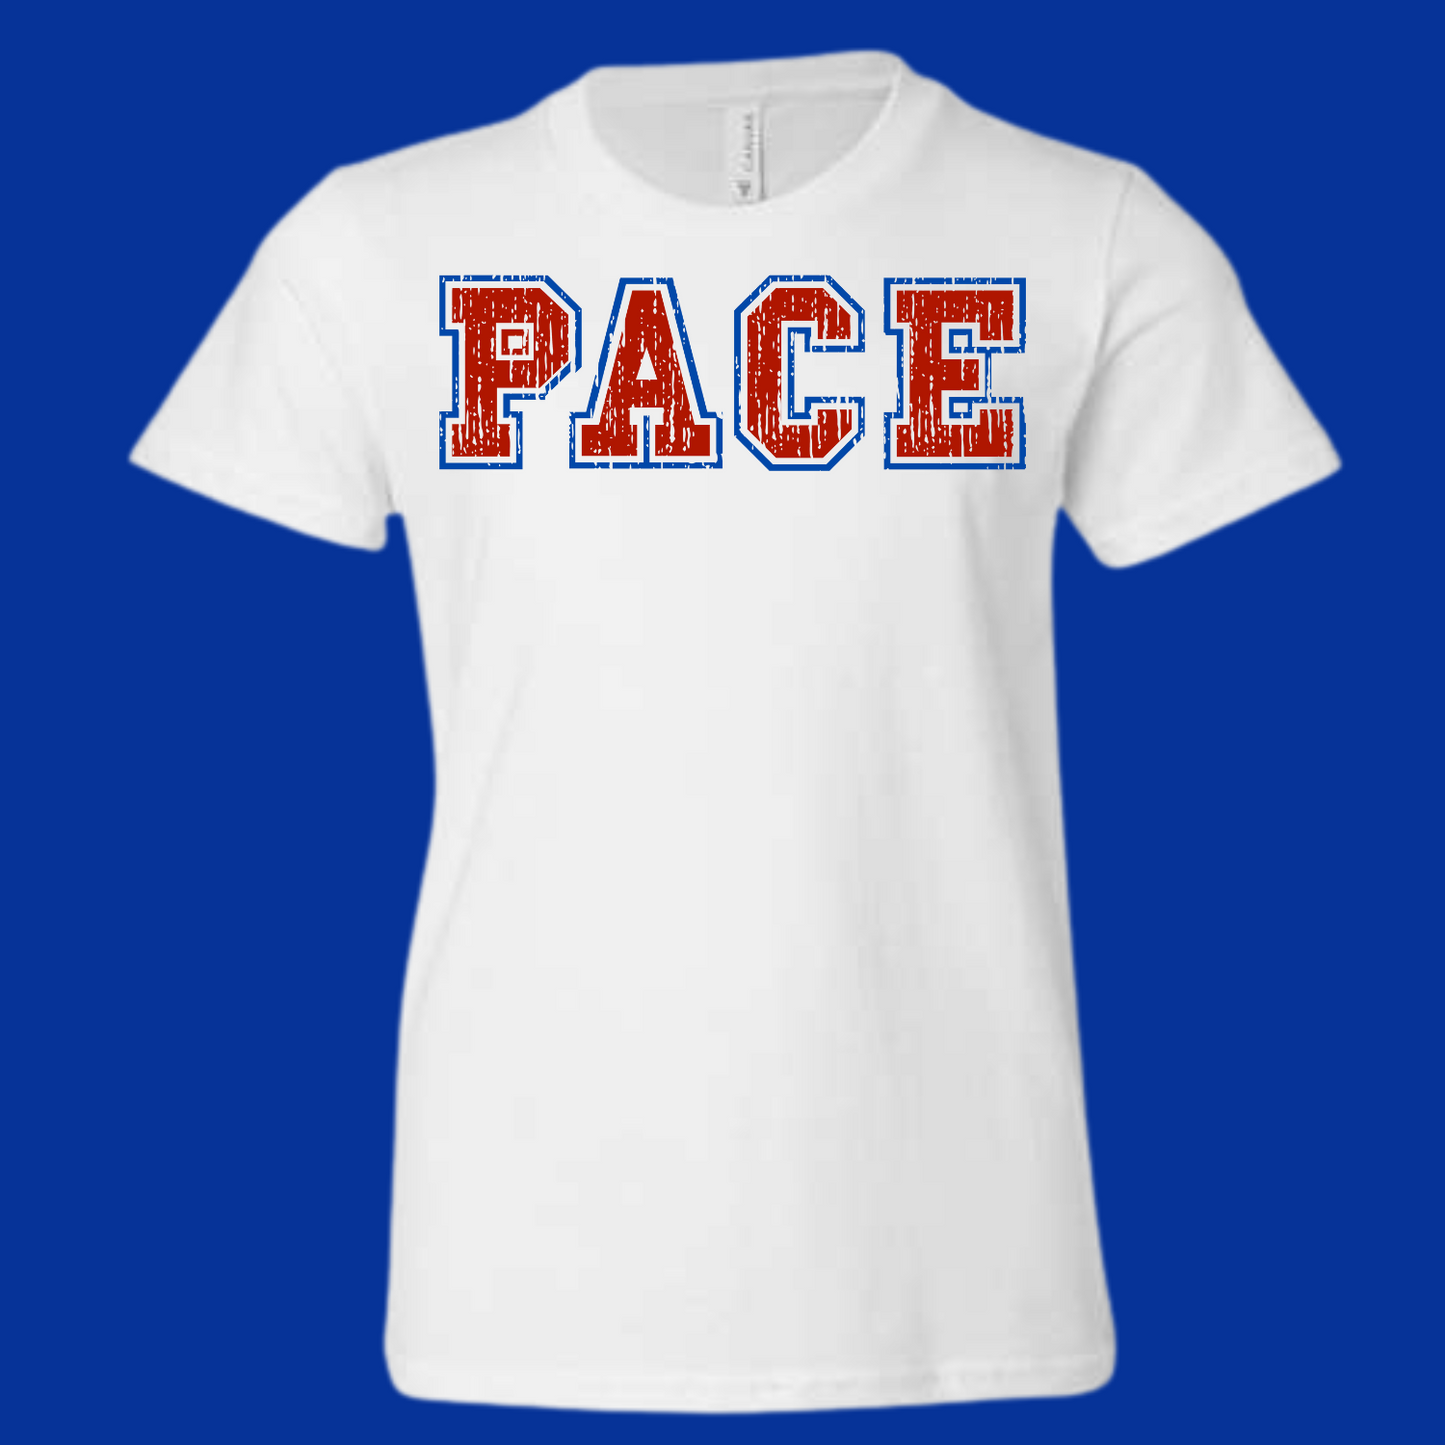 Pace Distressed Tee